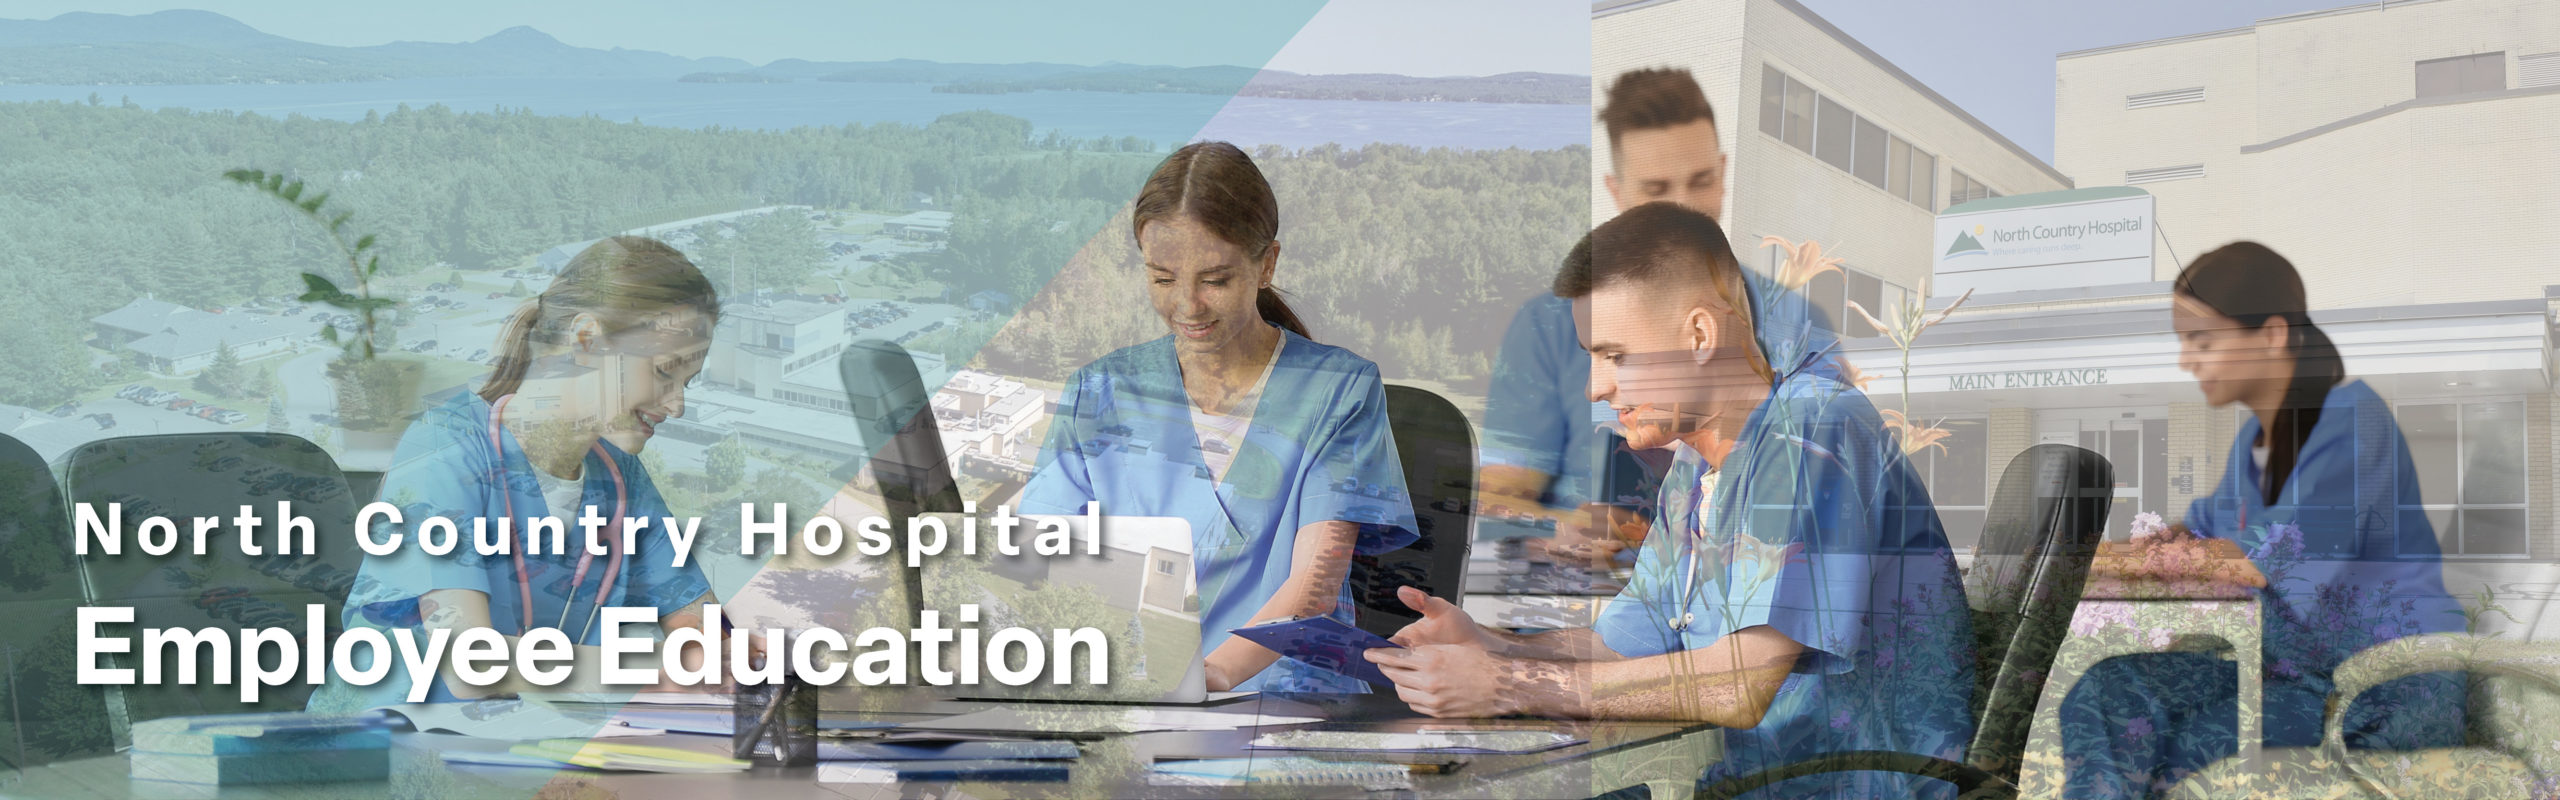 North Country Hospital Employee Education